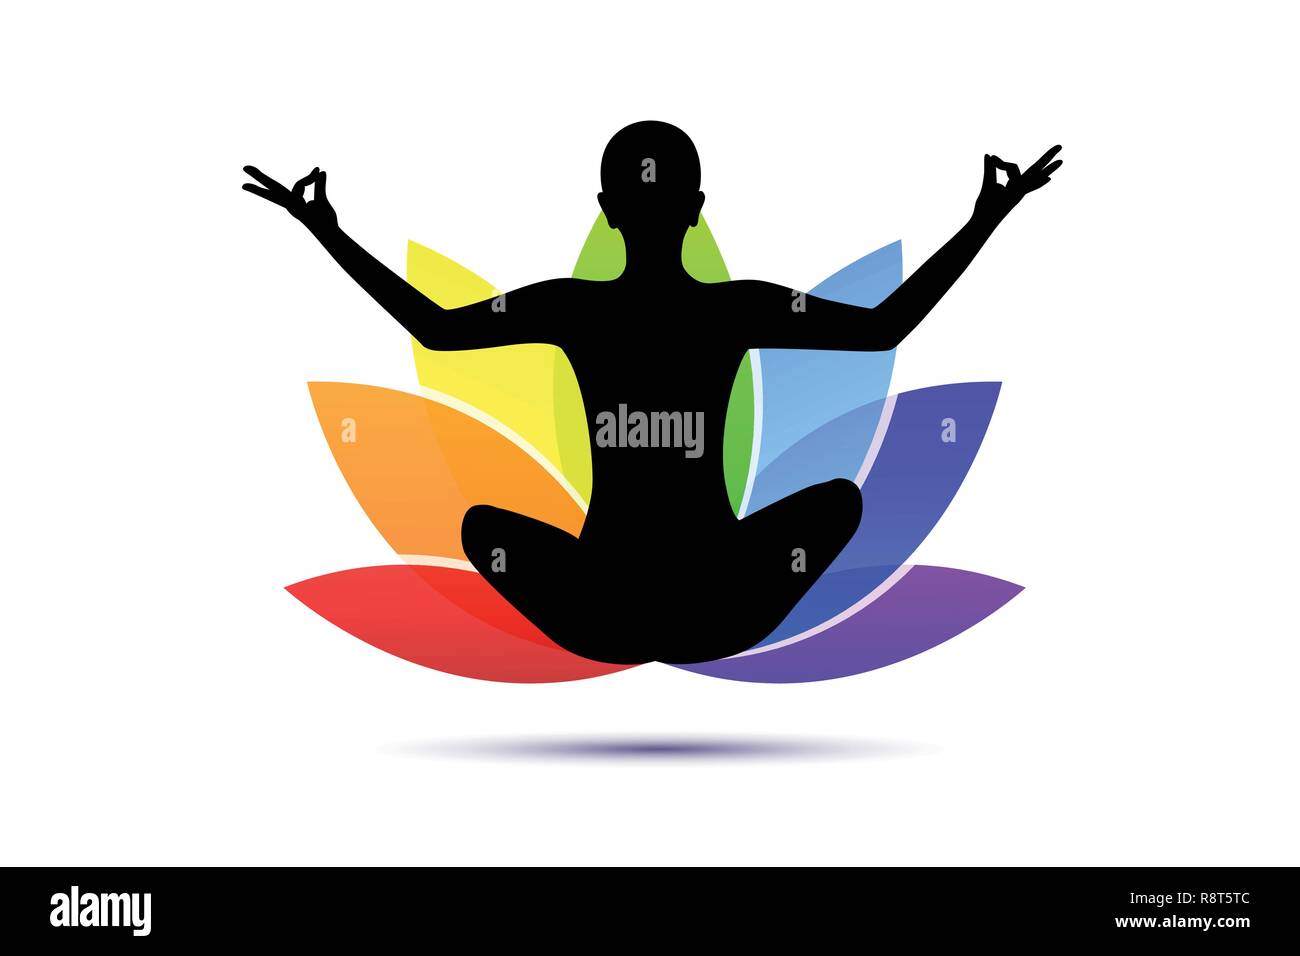 young person sitting in yoga meditation lotus position silhouette with lily in rainbow colors vector illustration EPS10 Stock Vector